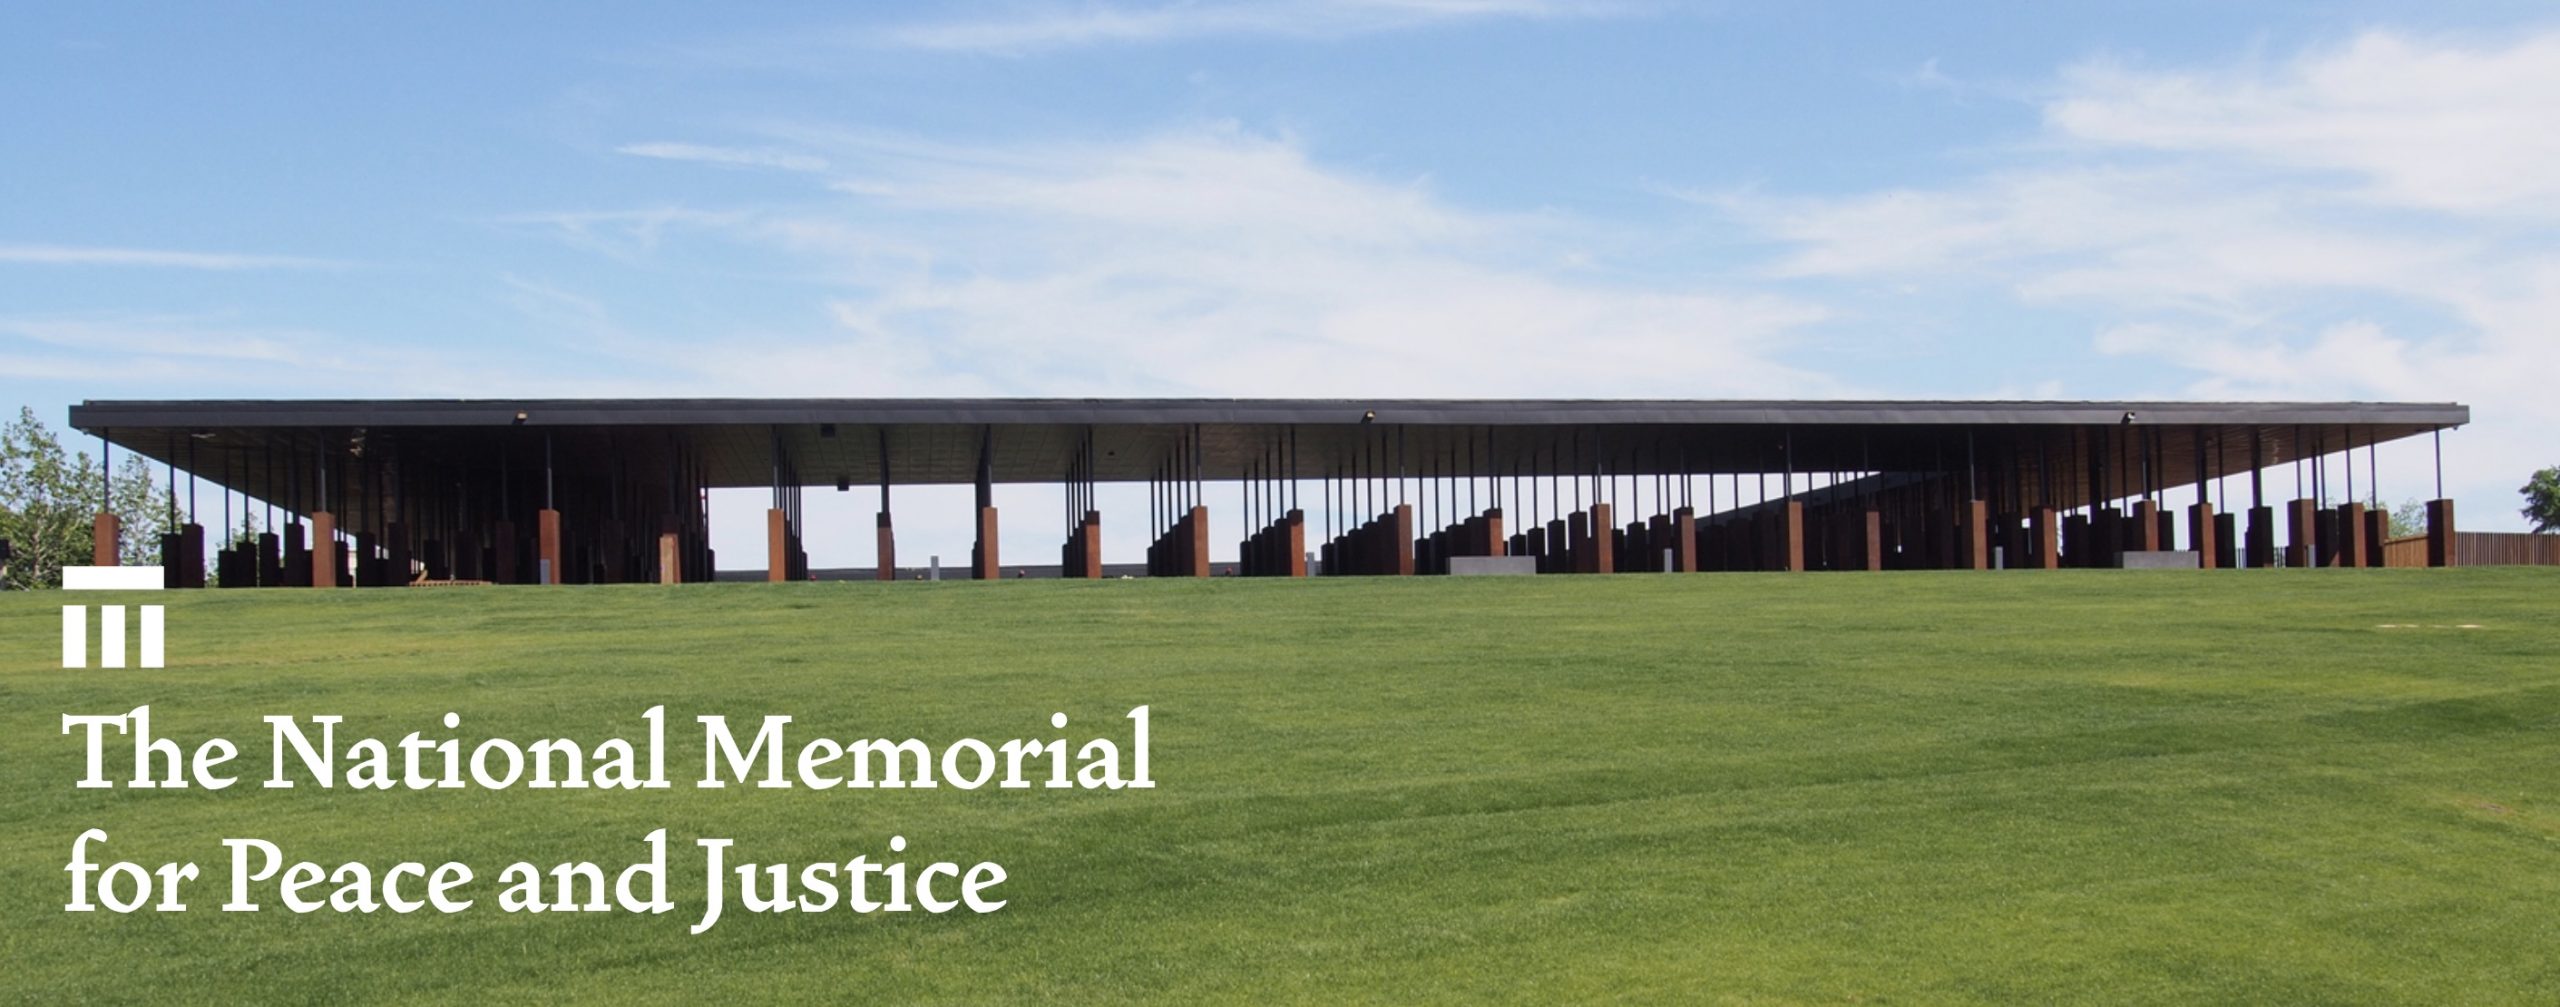 National Memorial for Peace and Justice in Montgomery, Alabama